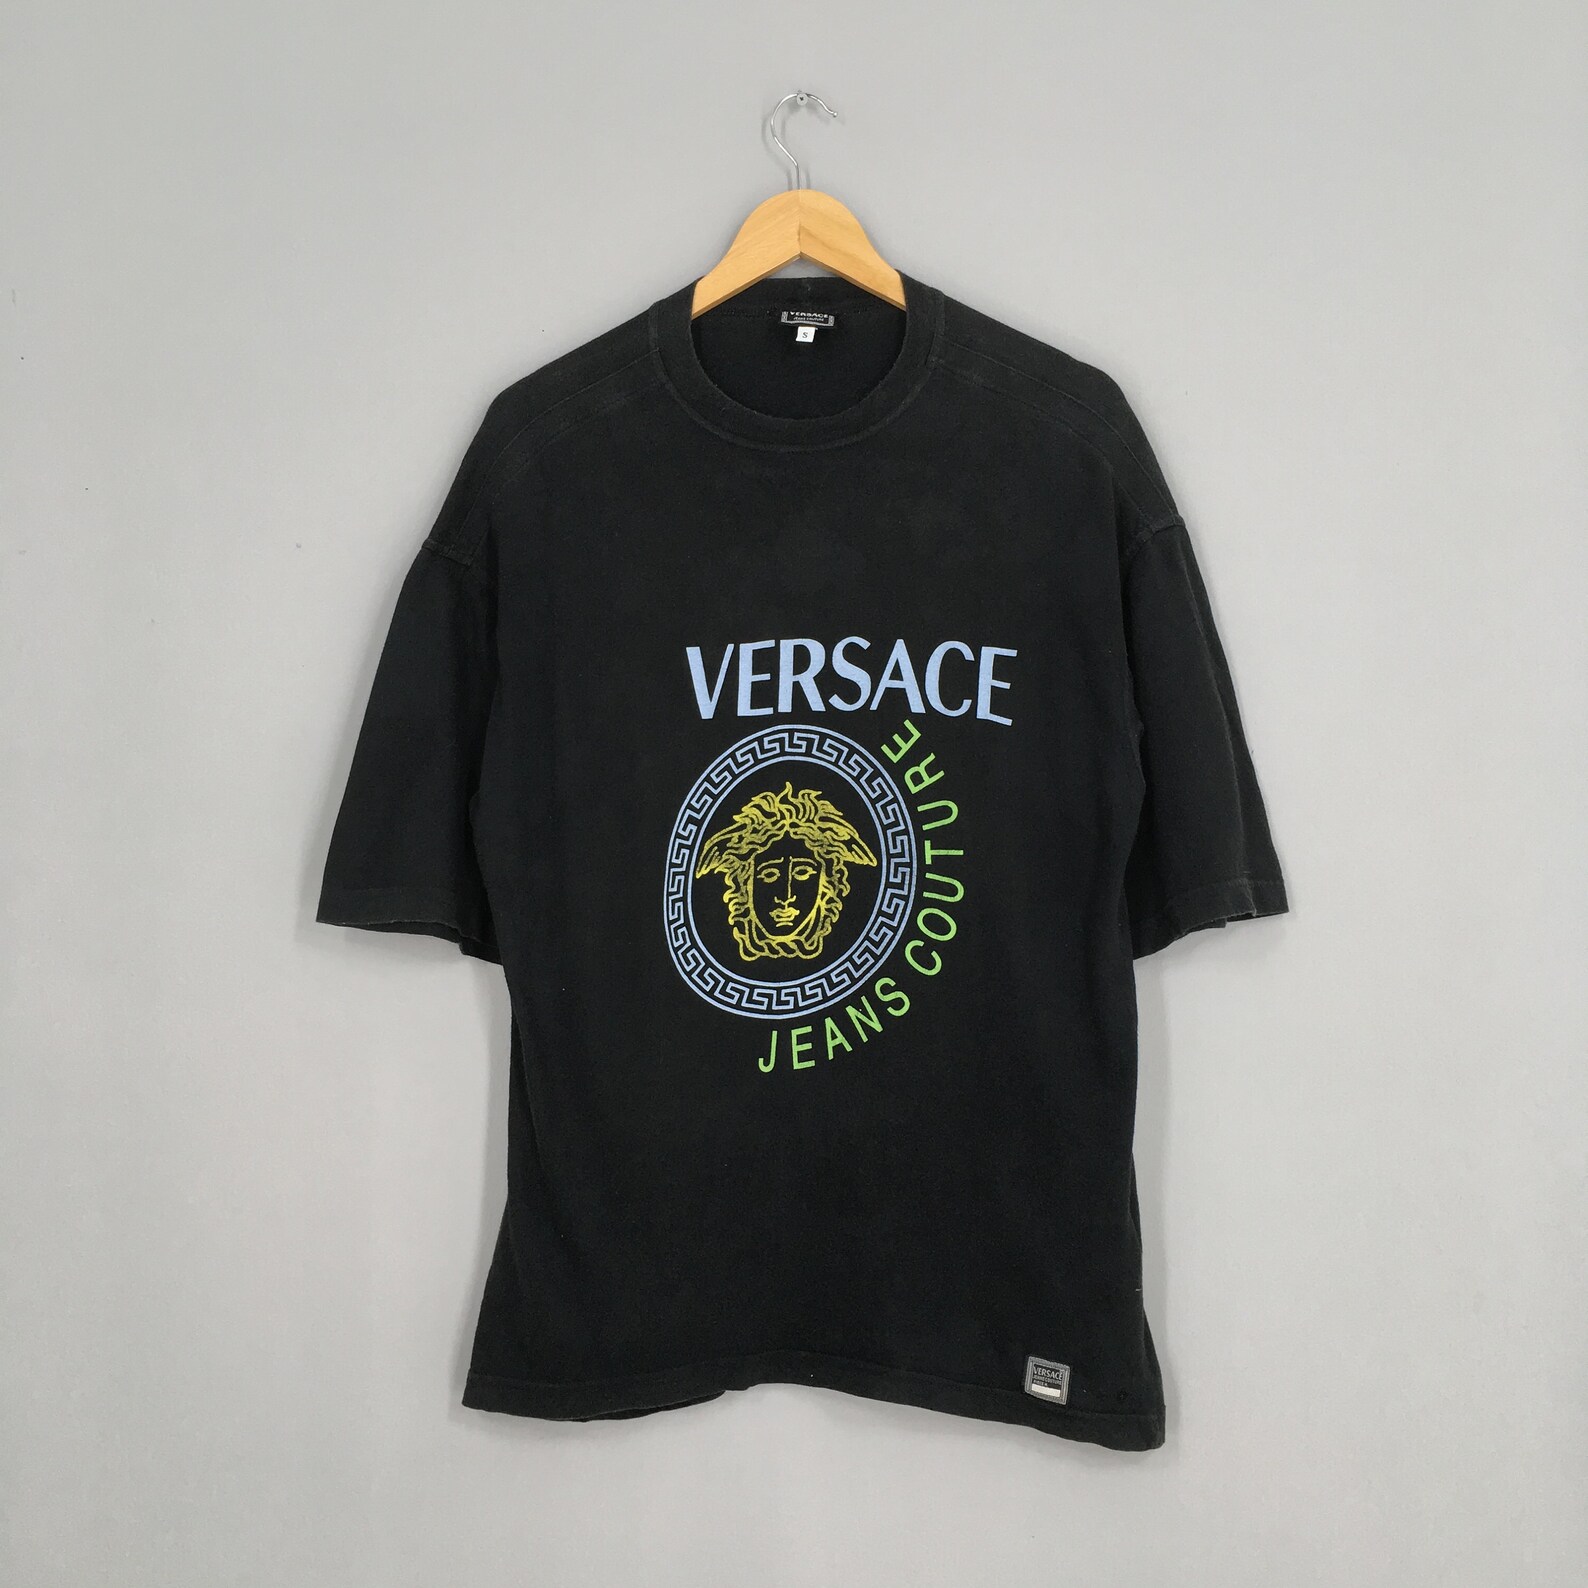 Vintage 90's Gianni Versace Tshirt Small Versace Jeans | Etsy